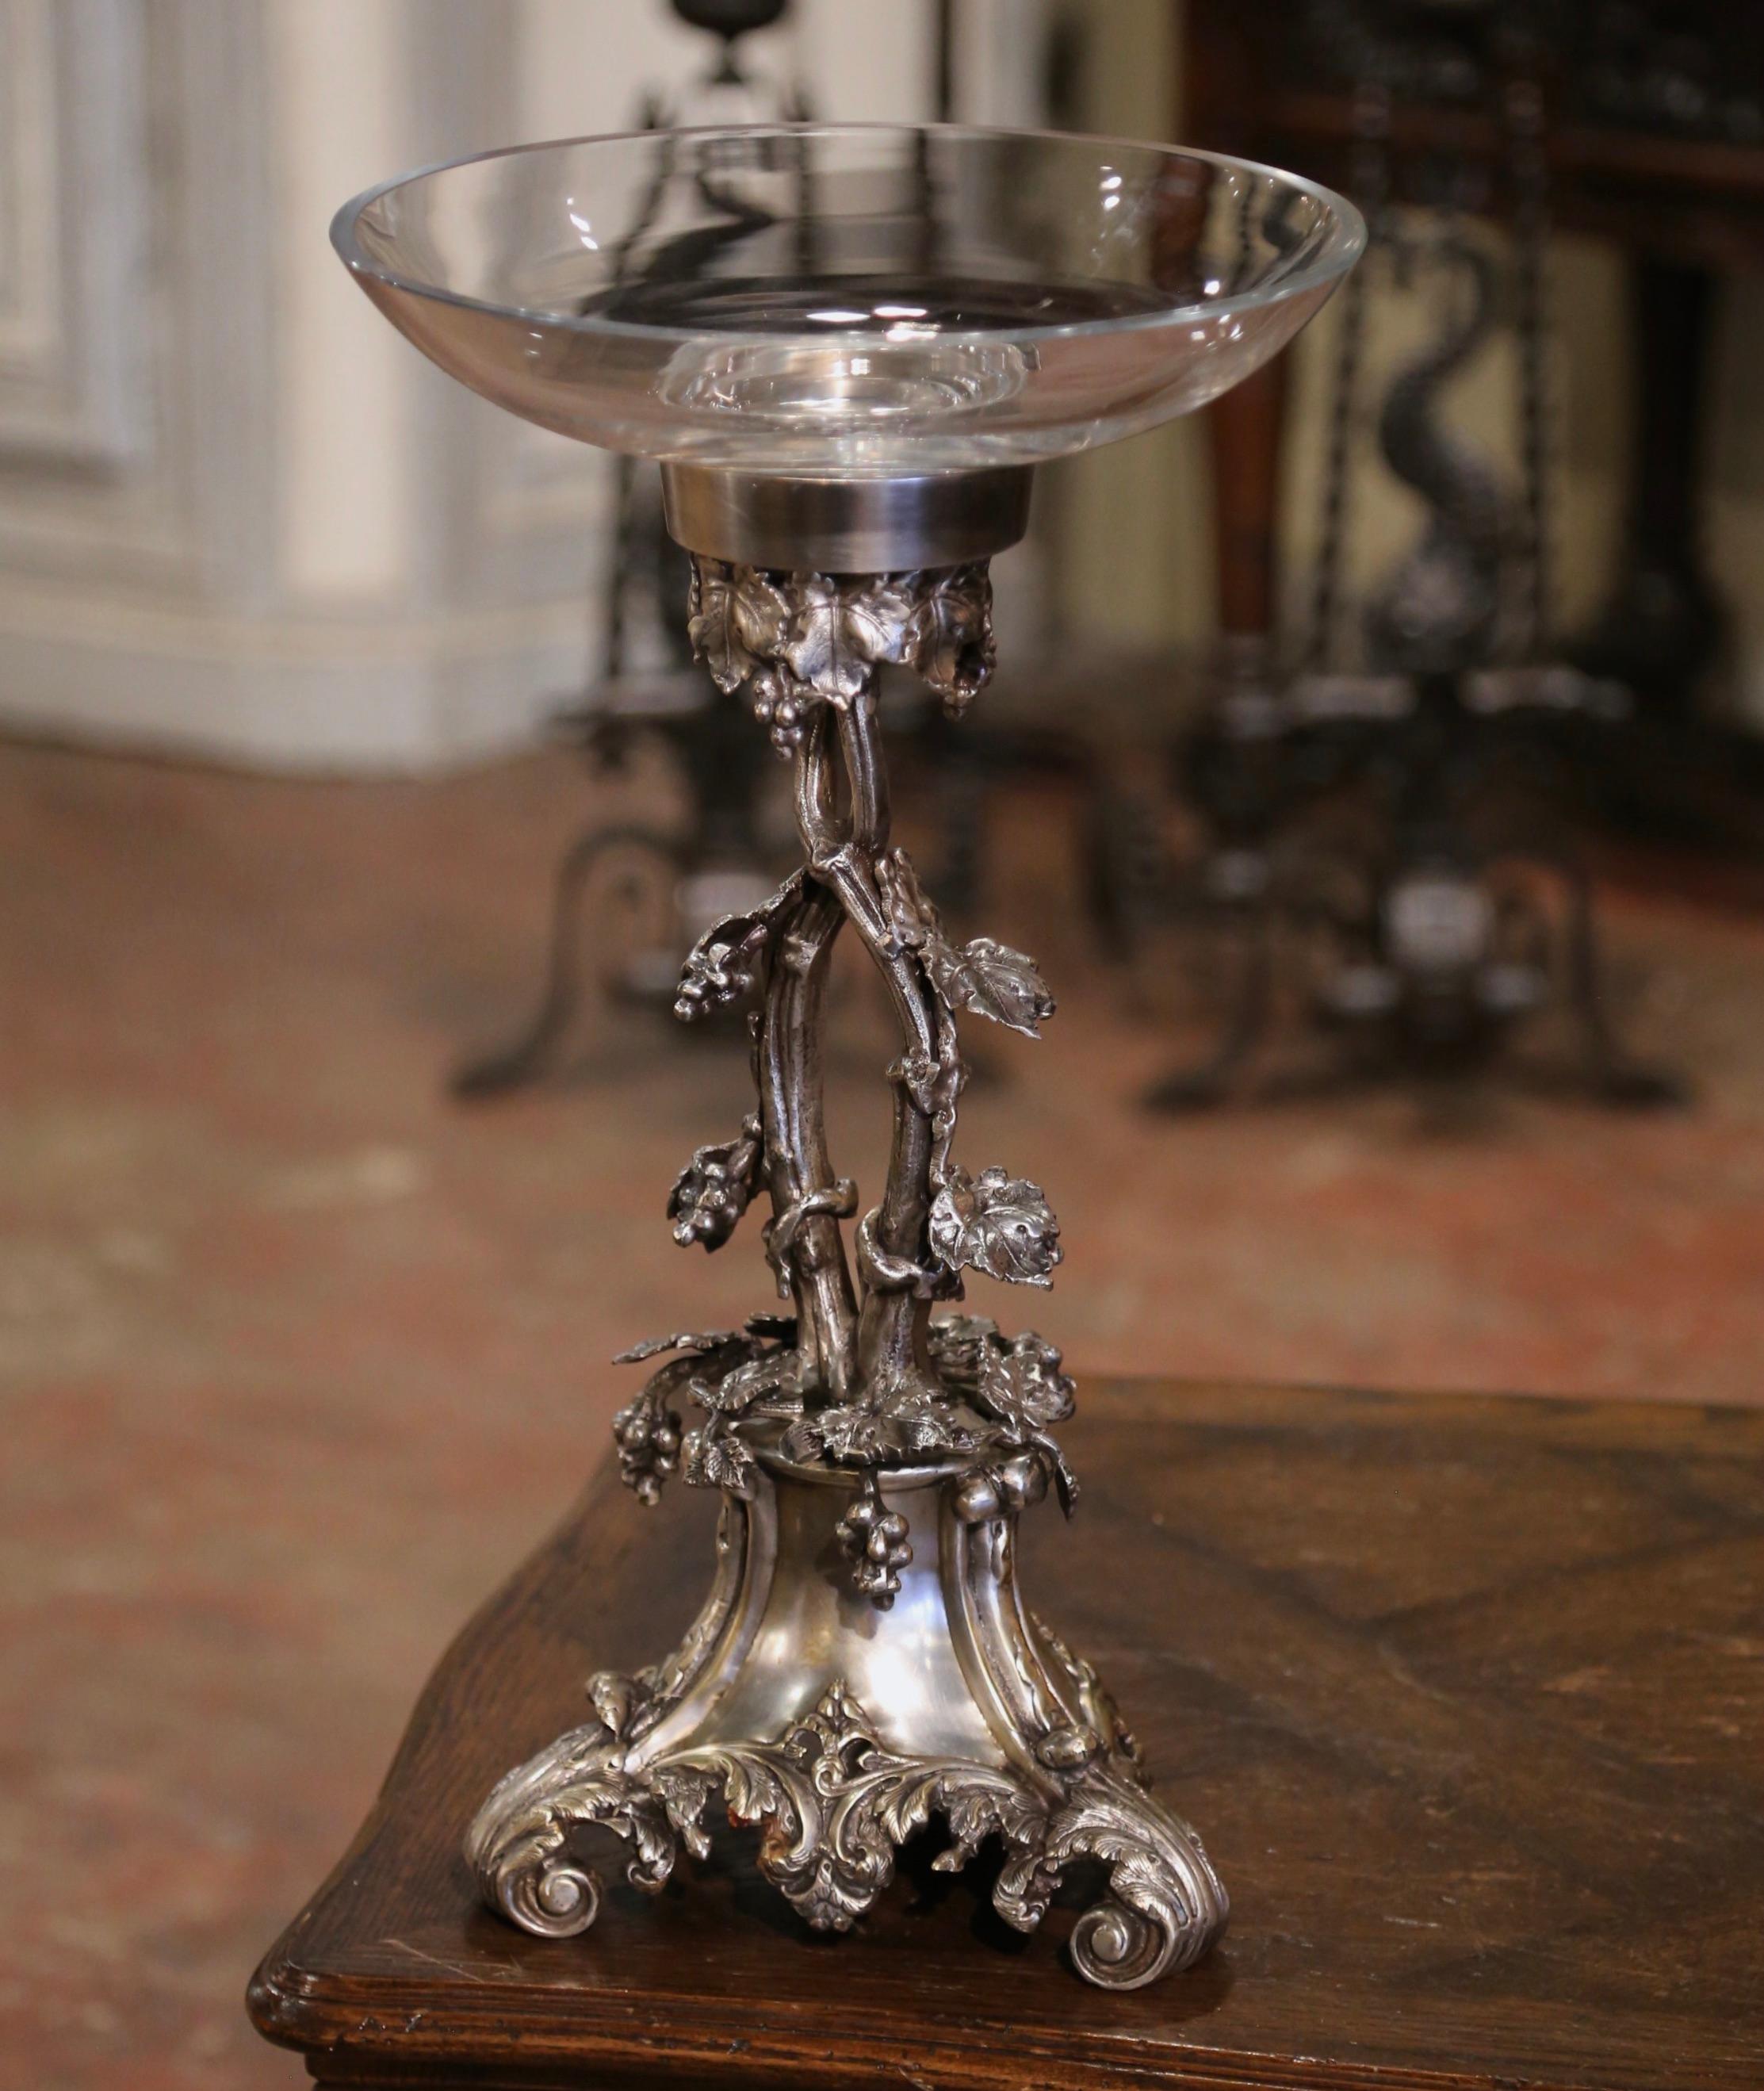 Decorate a console or dining table with this elegant antique centerpiece. Crafted in France circa 1950 and made of bronze with silver, the 